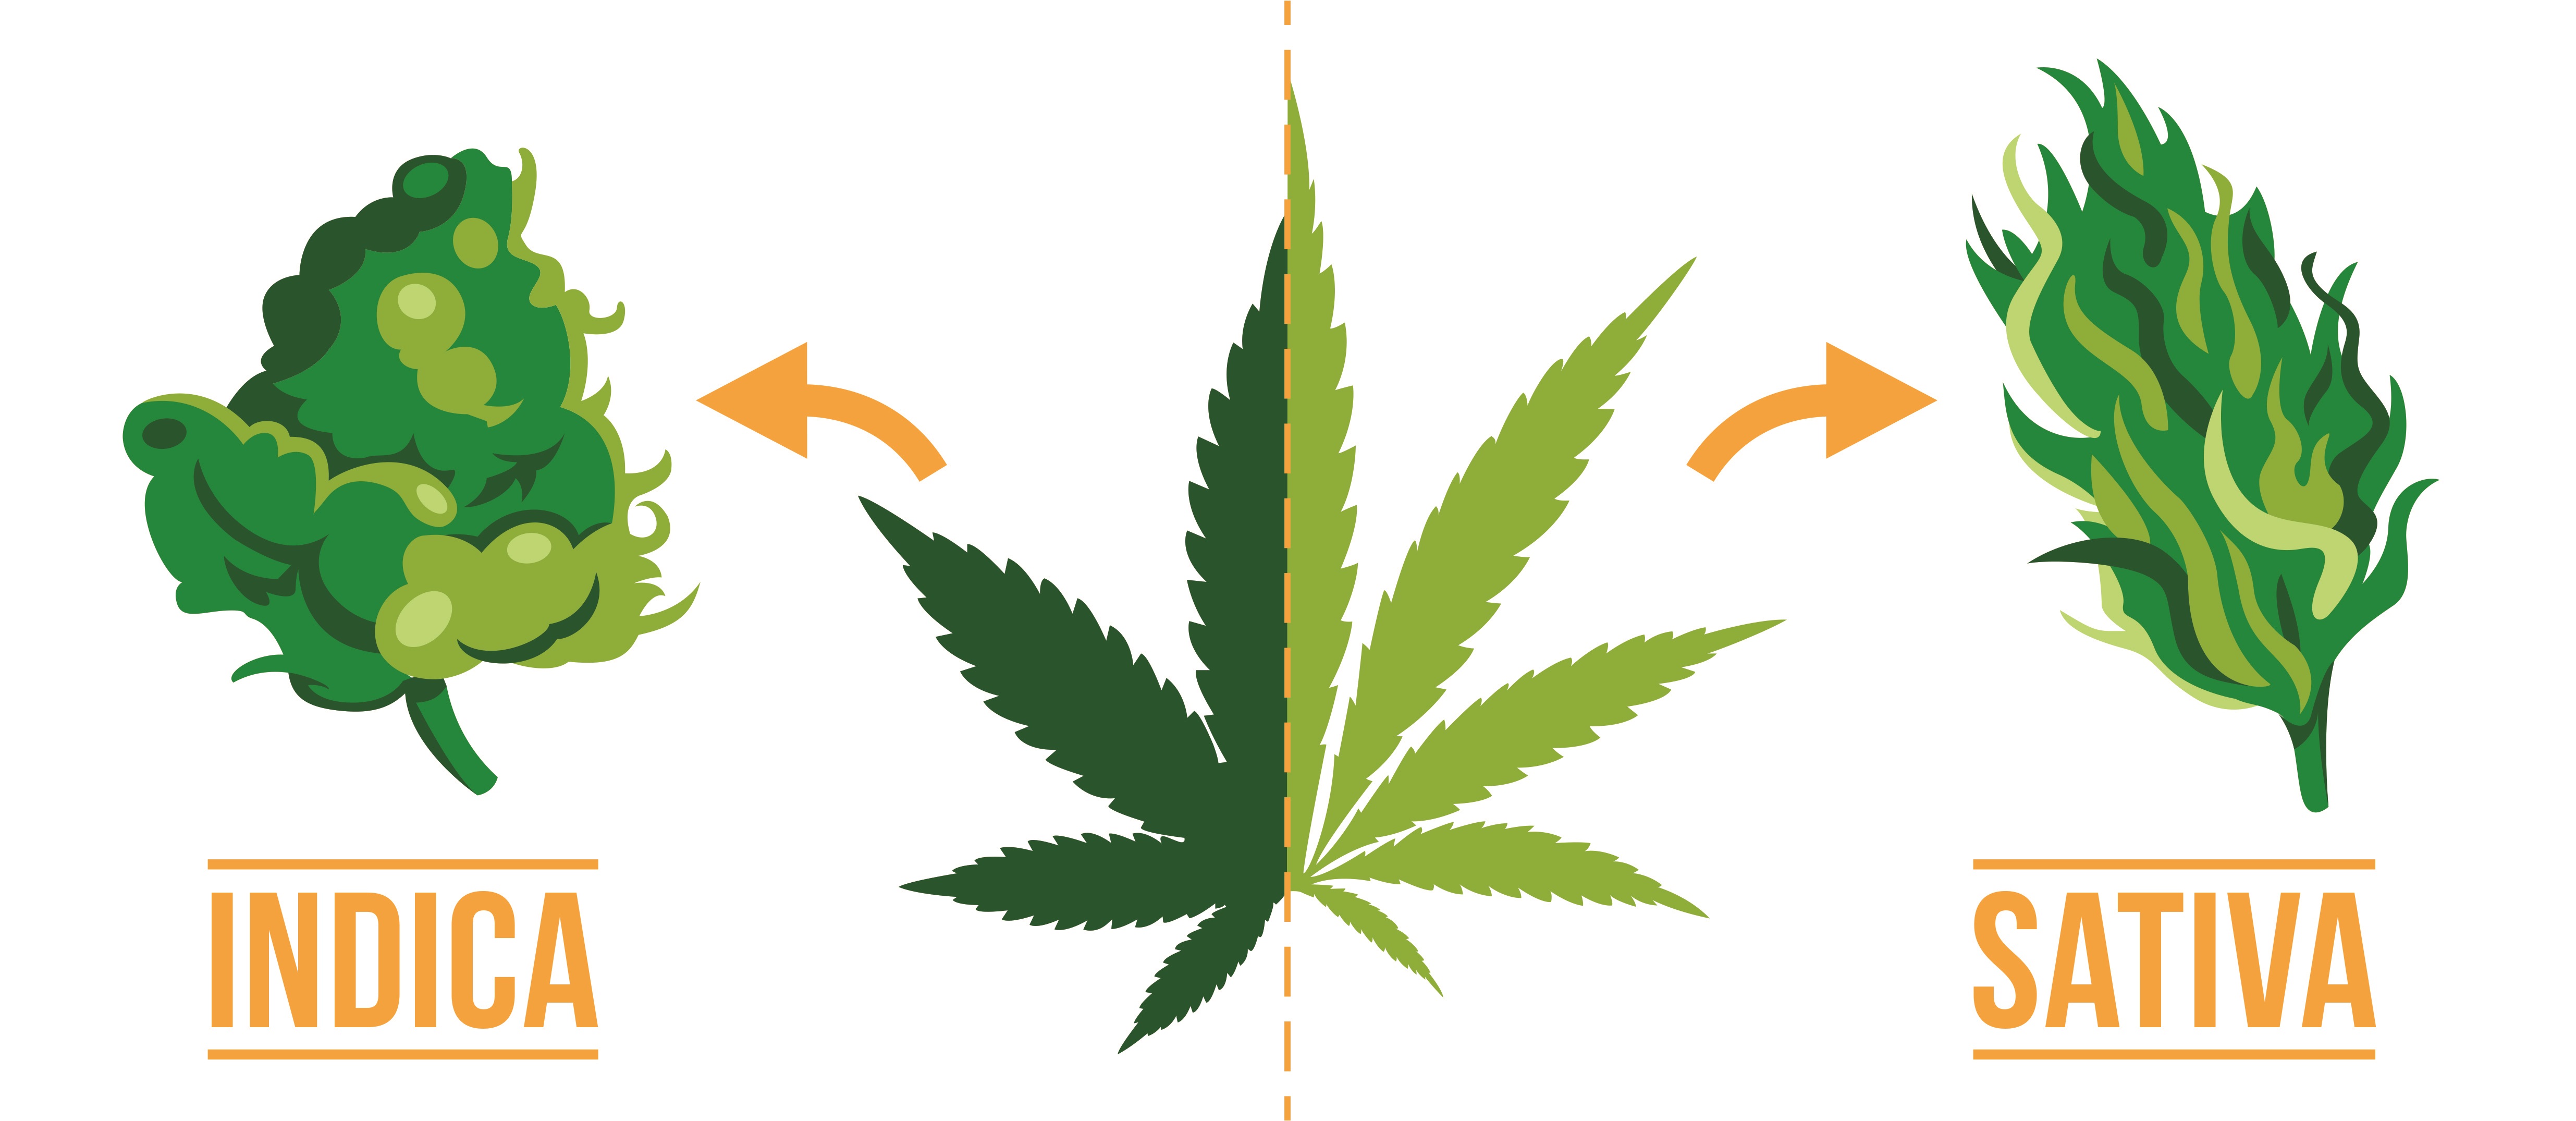 Difference-entre-Indica-et-Sativa-apparence-physique.jpg